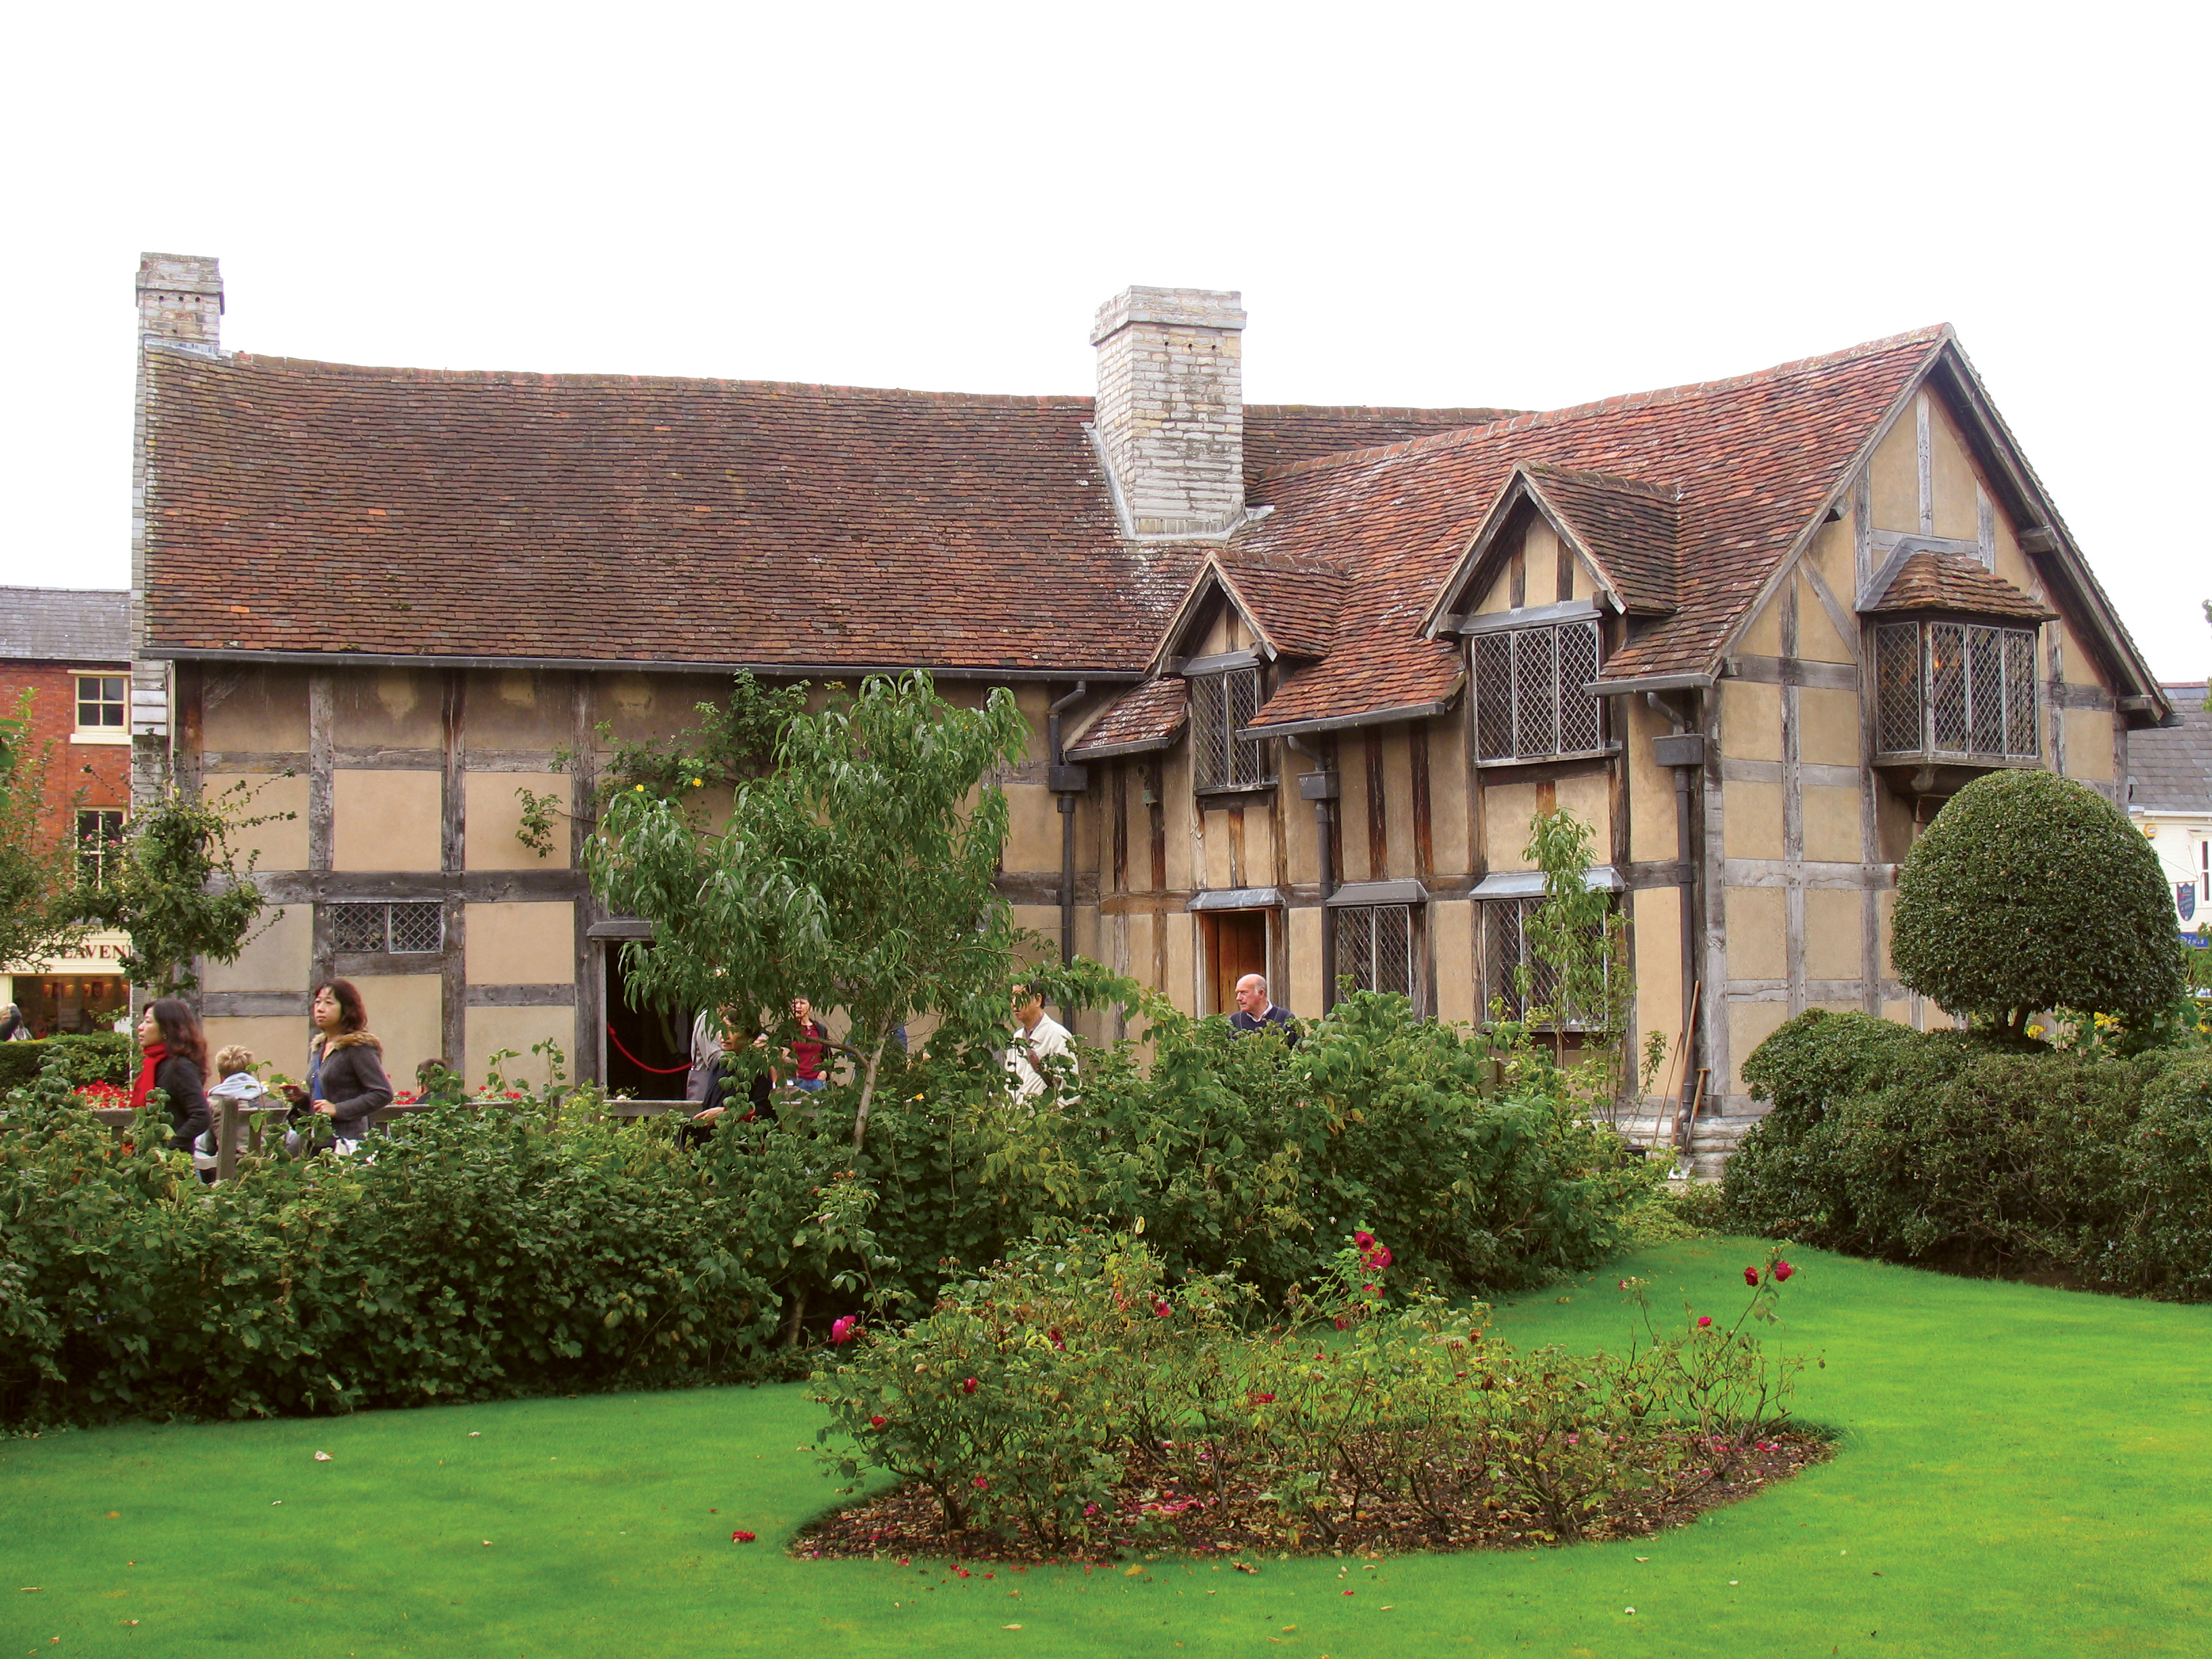 Oxford, Stratford-upon-Avon, Cotswolds and Warwick Castle